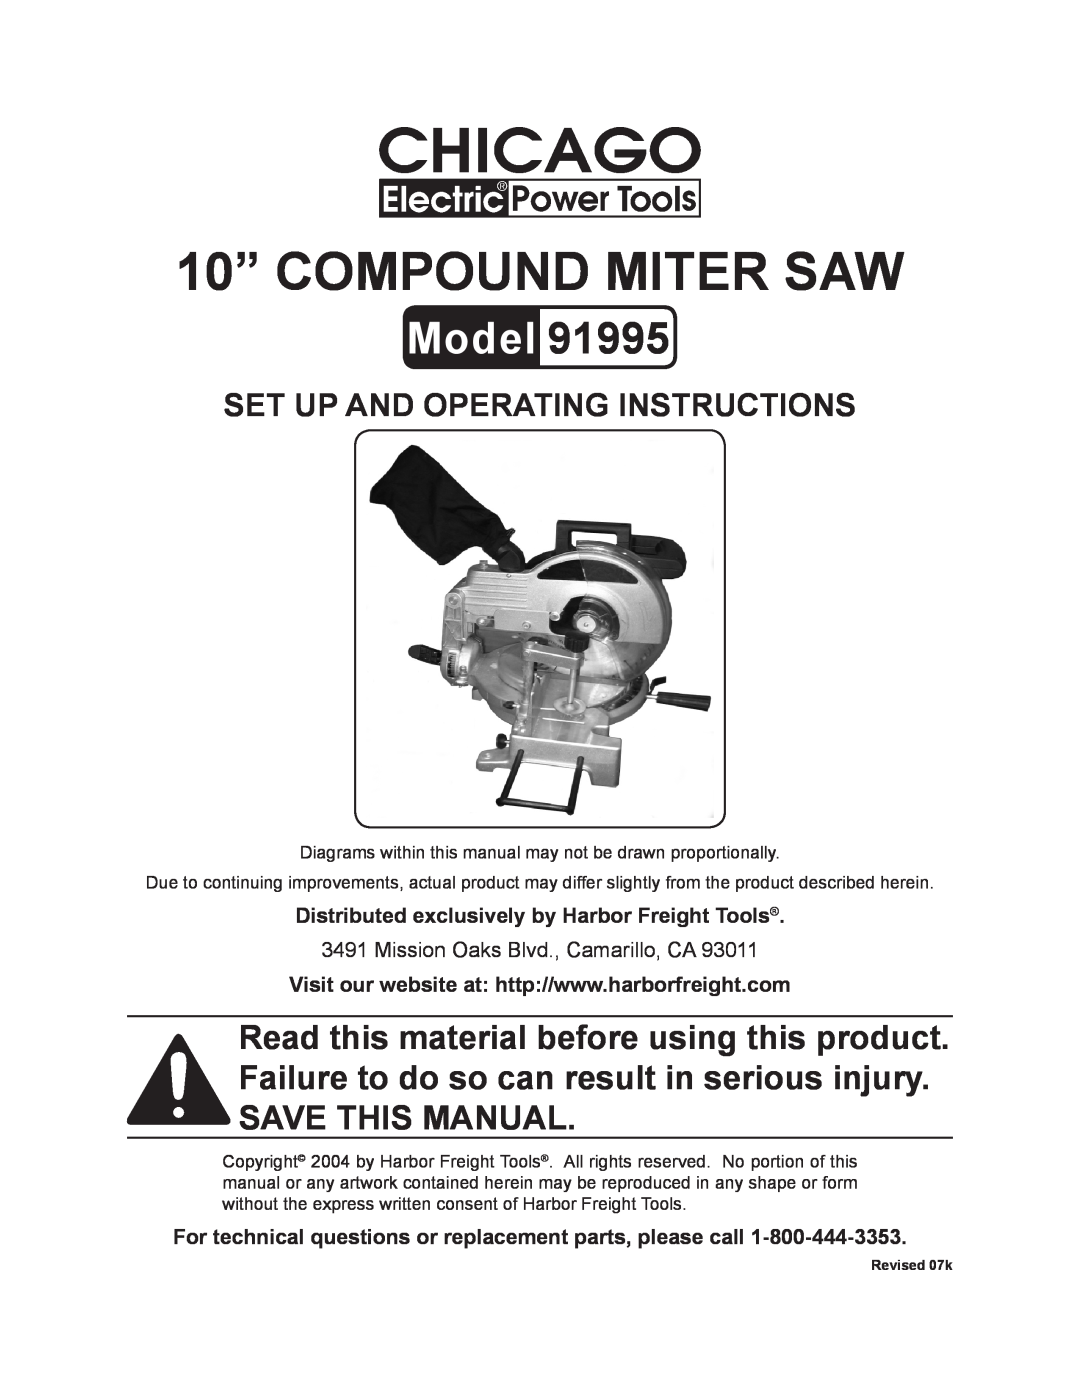 Chicago Electric 91995 operating instructions Distributed exclusively by Harbor Freight Tools, 10” COMPOUND MITER SAW 